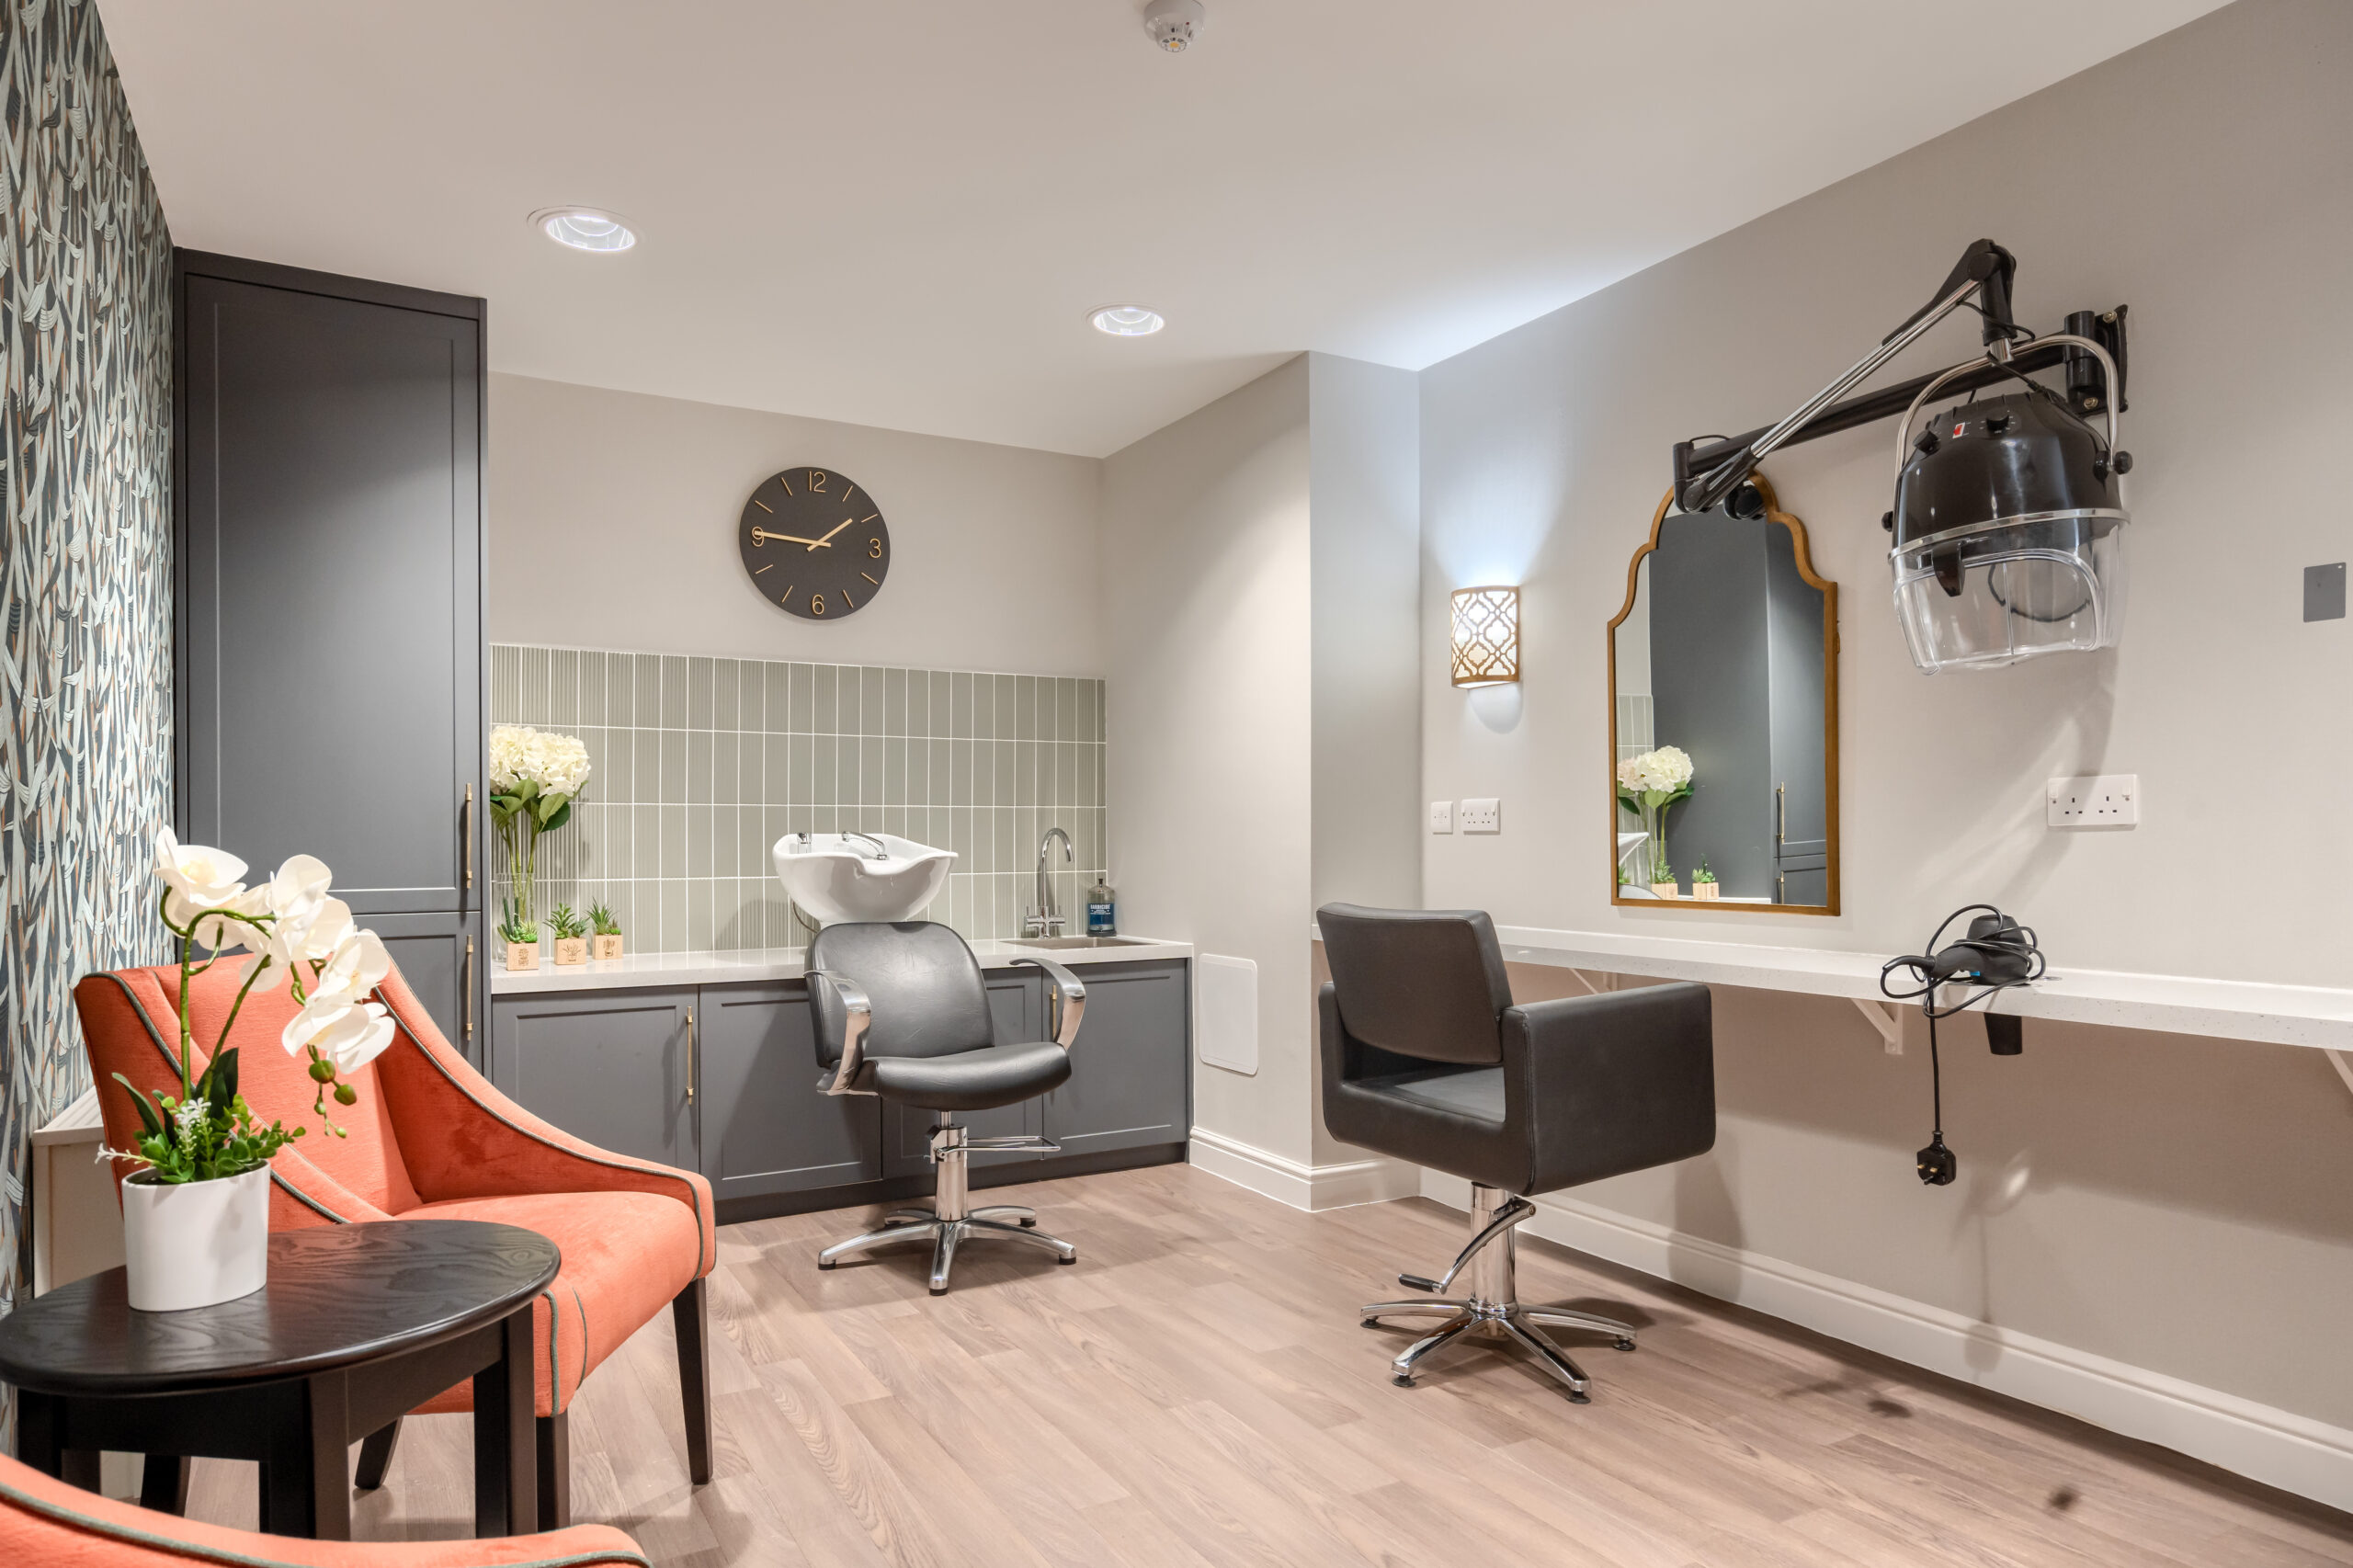 Hastings Court Care Home Salon